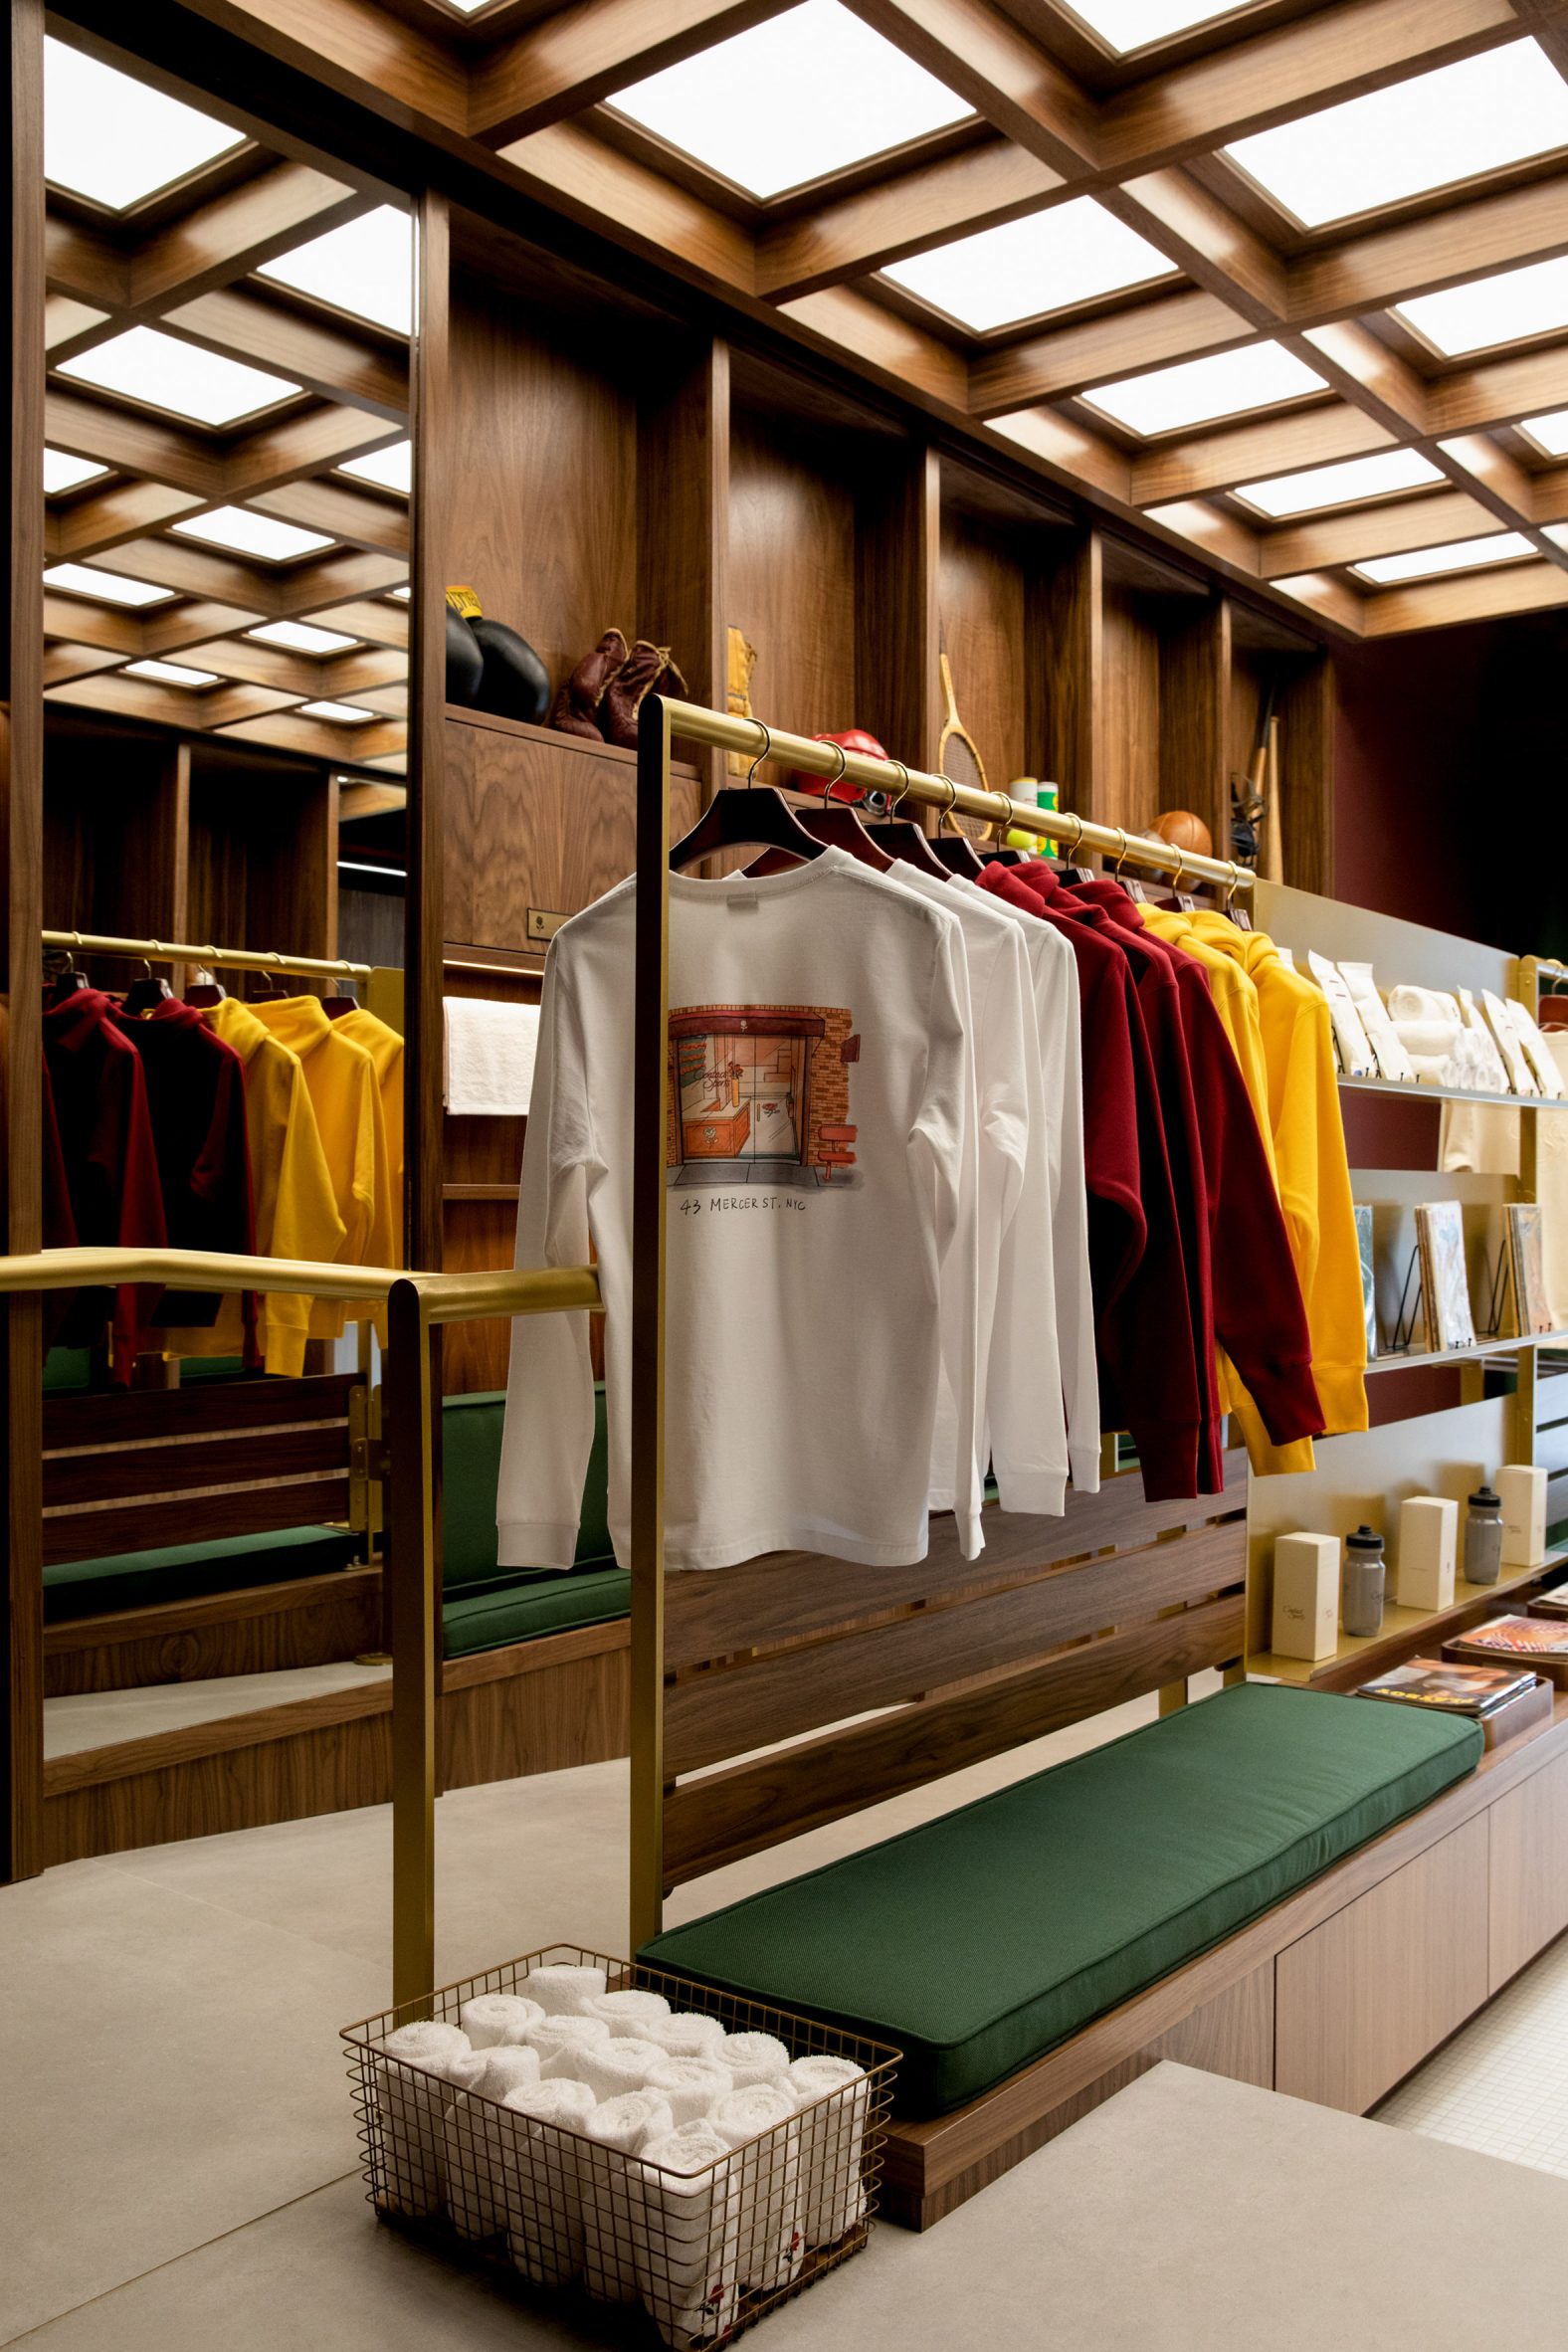 Merchandise displayed on brass rails and shelving